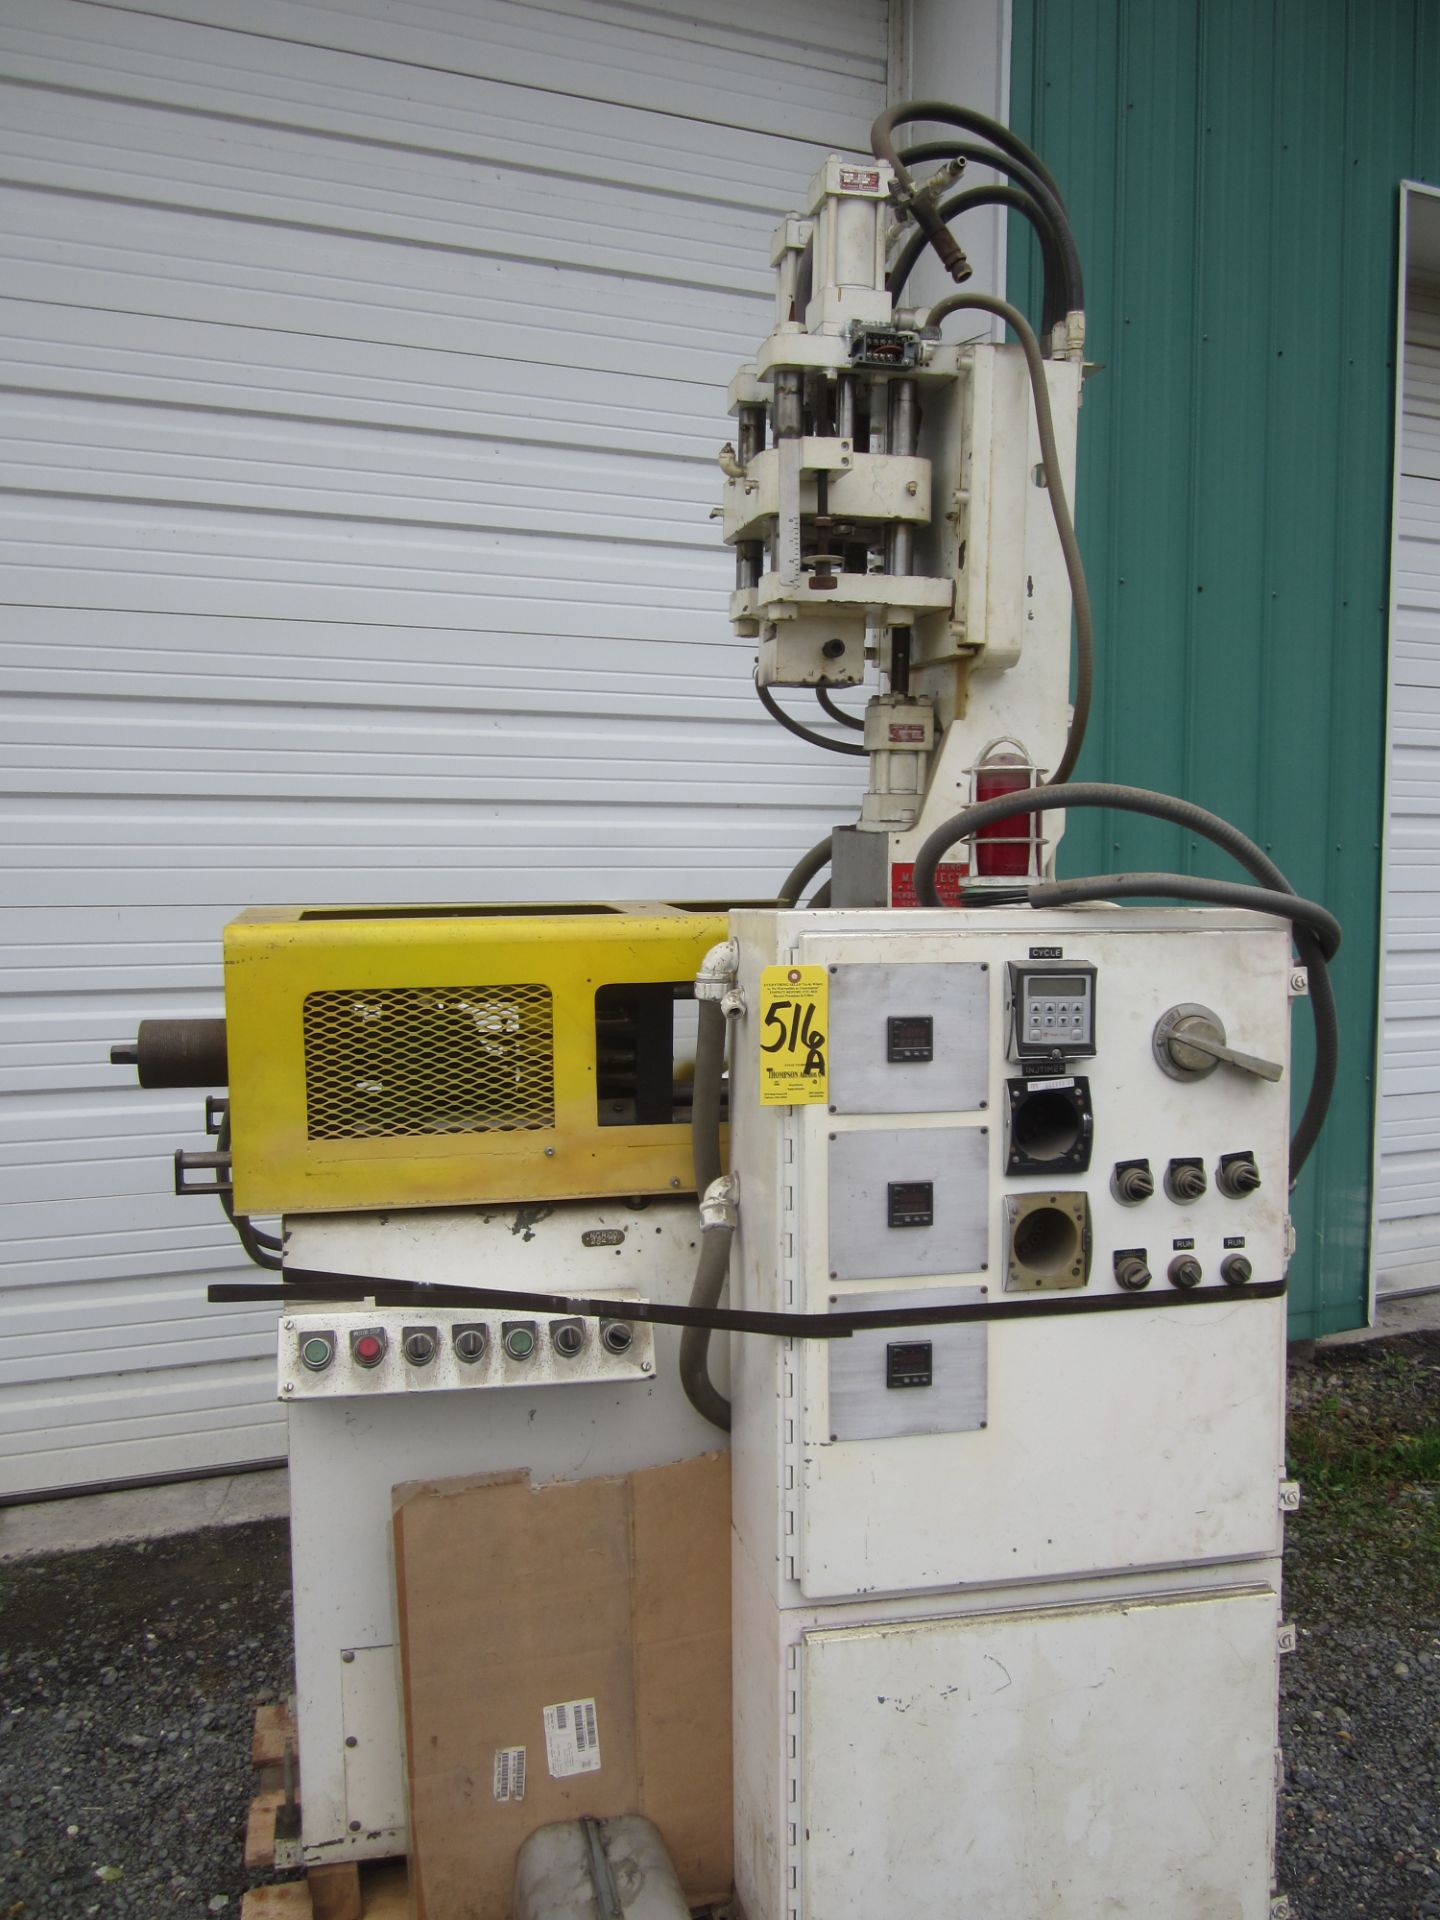 Newbury Model HV125RS Vertical Plastic Injeciton Mold Machine, s/n 614-092567, with Controls,